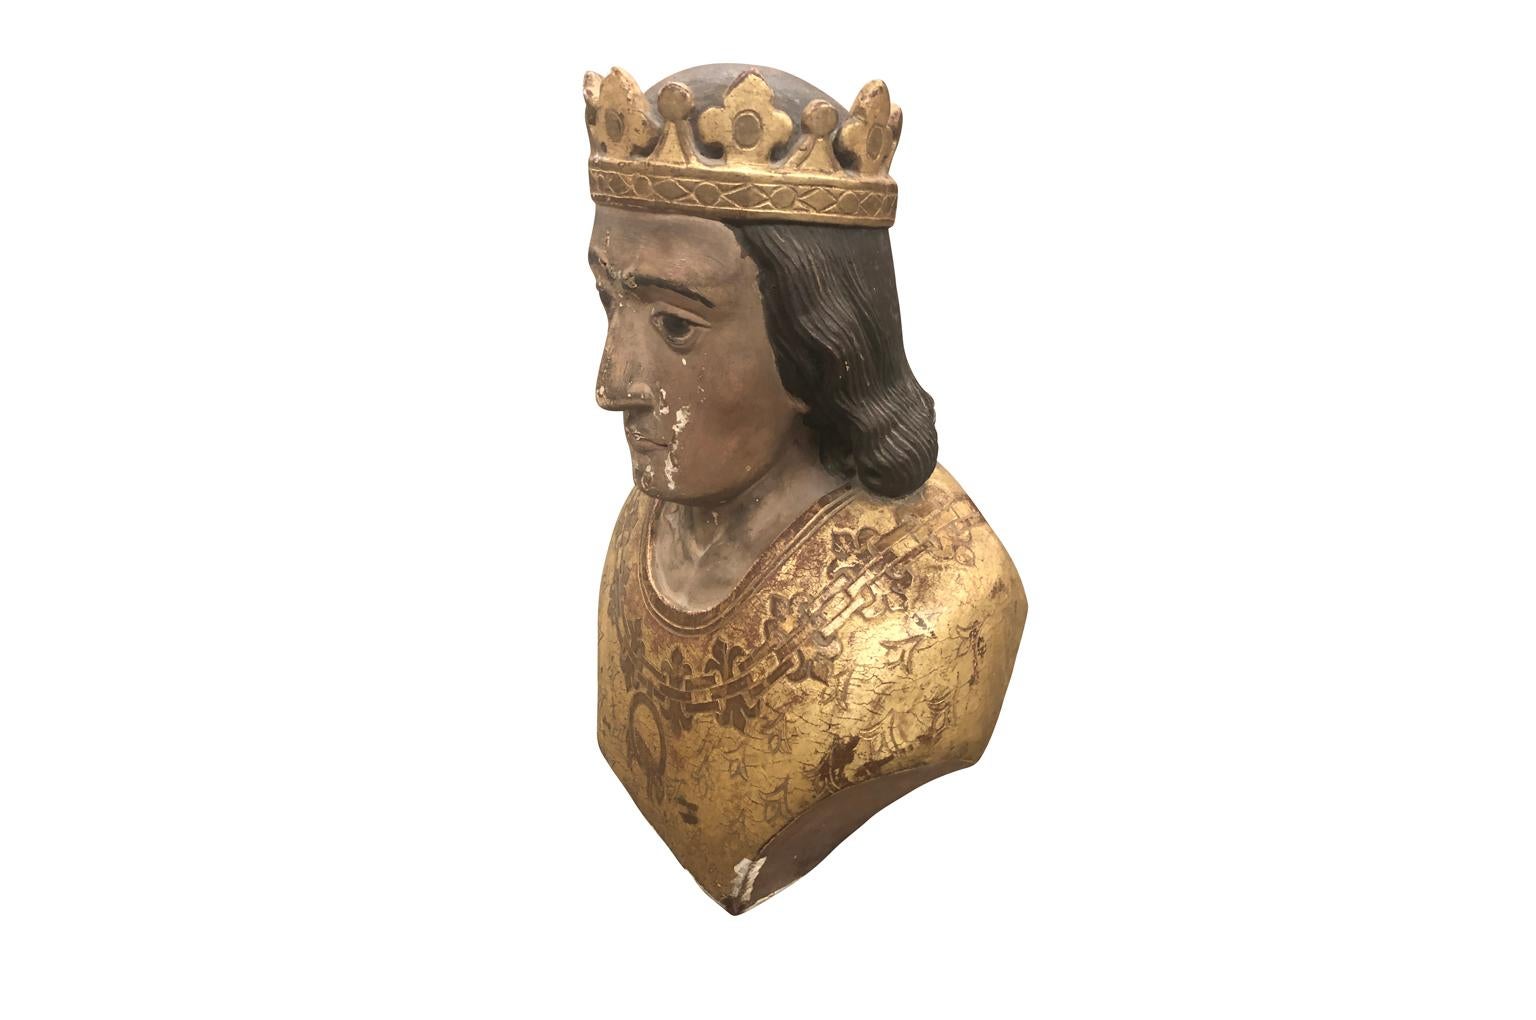 A magnificent 18th century bust of King Louis IX of France, Saint Louis. Wonderfully hand carved from wood with a water gilded finish. Decorated with the fleur-de-lis and the Lamb of God.